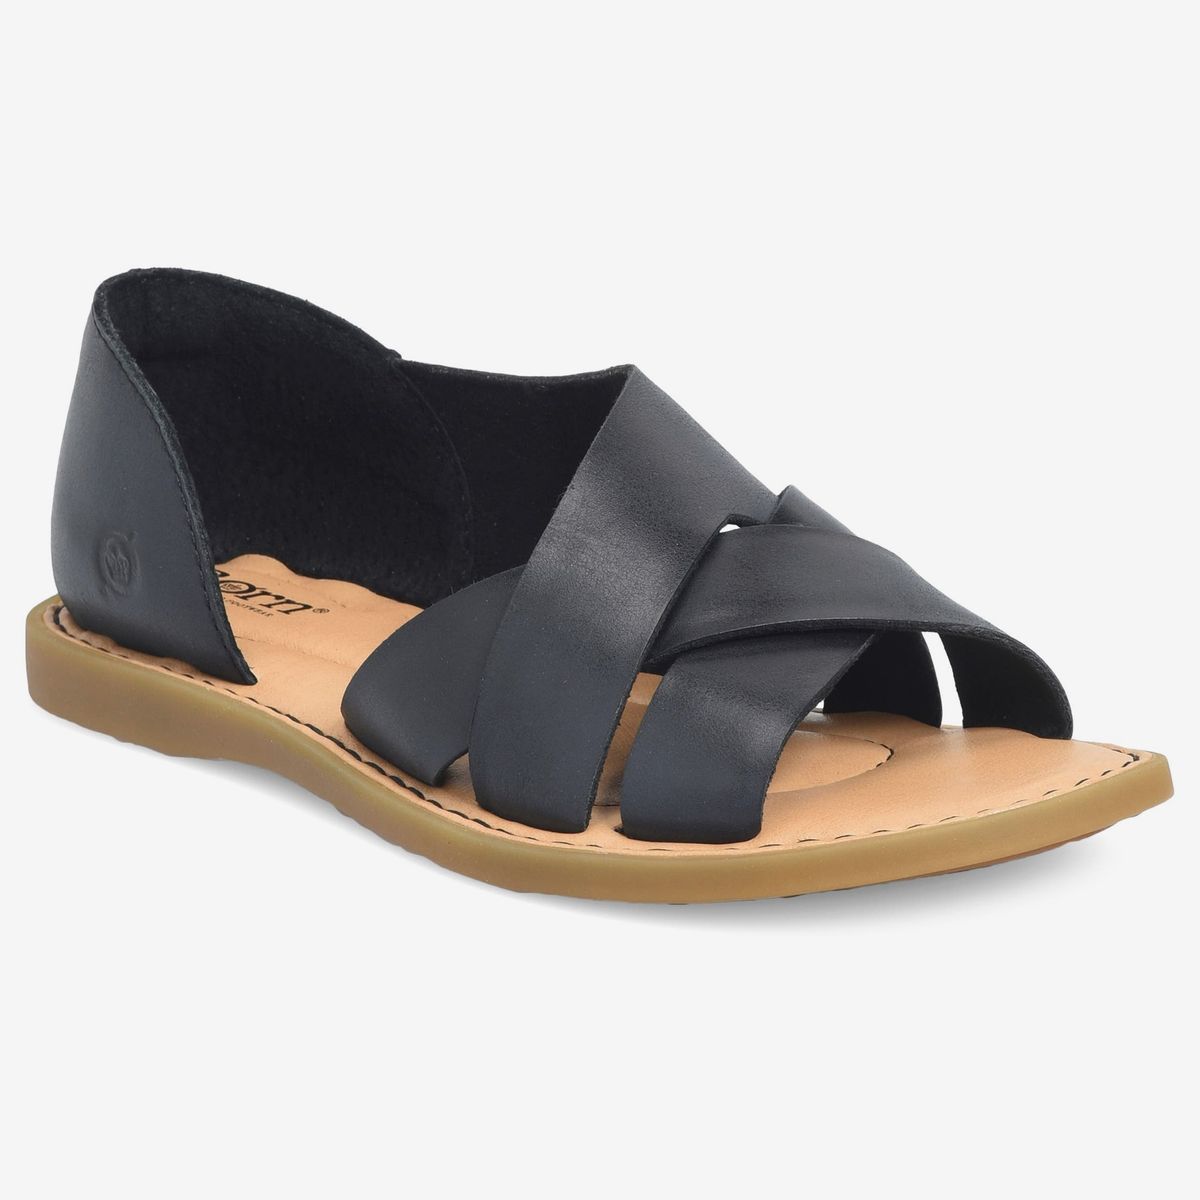 Børn Ithica Strappy Sandal